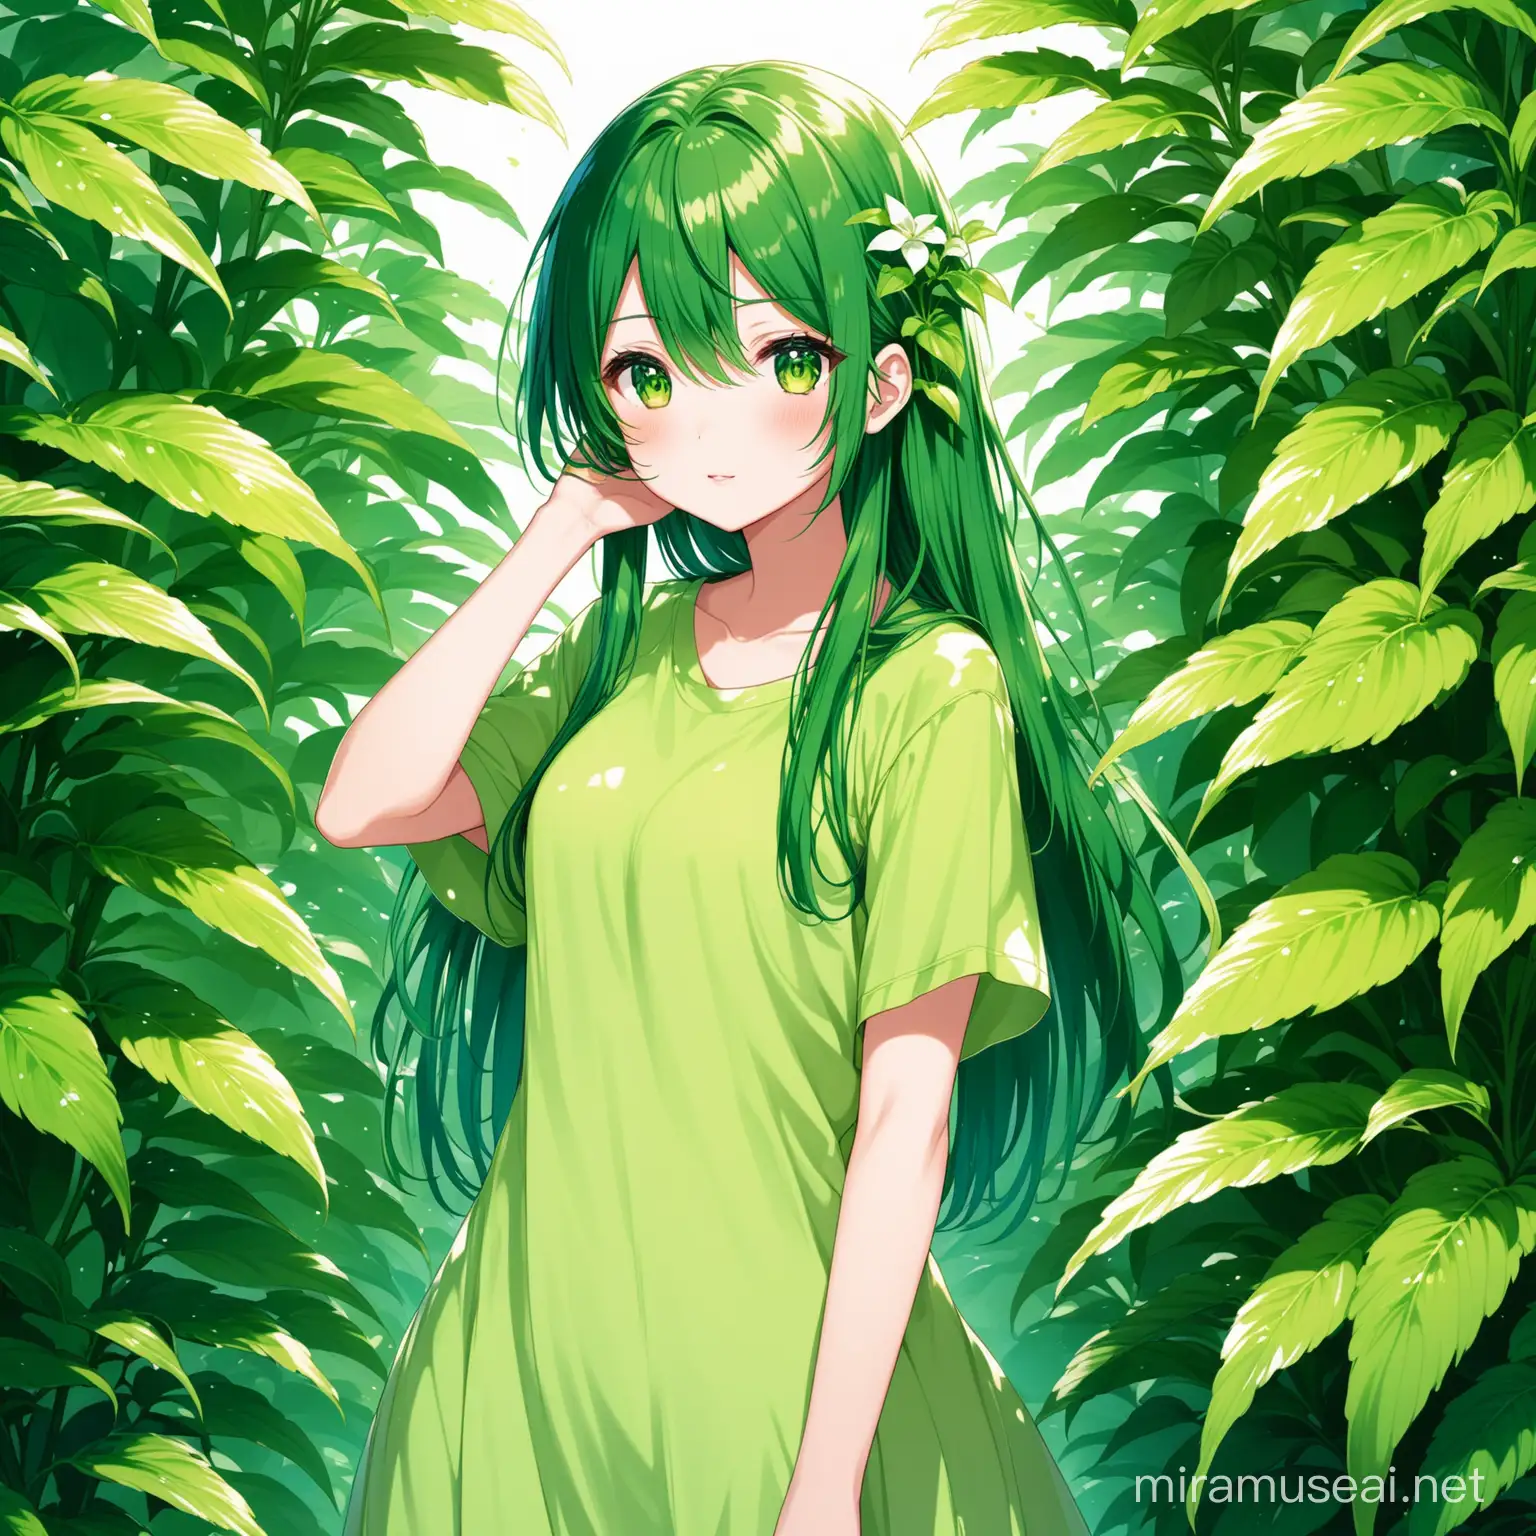 Adorable Anime Girl Surrounded by Lush Greenery